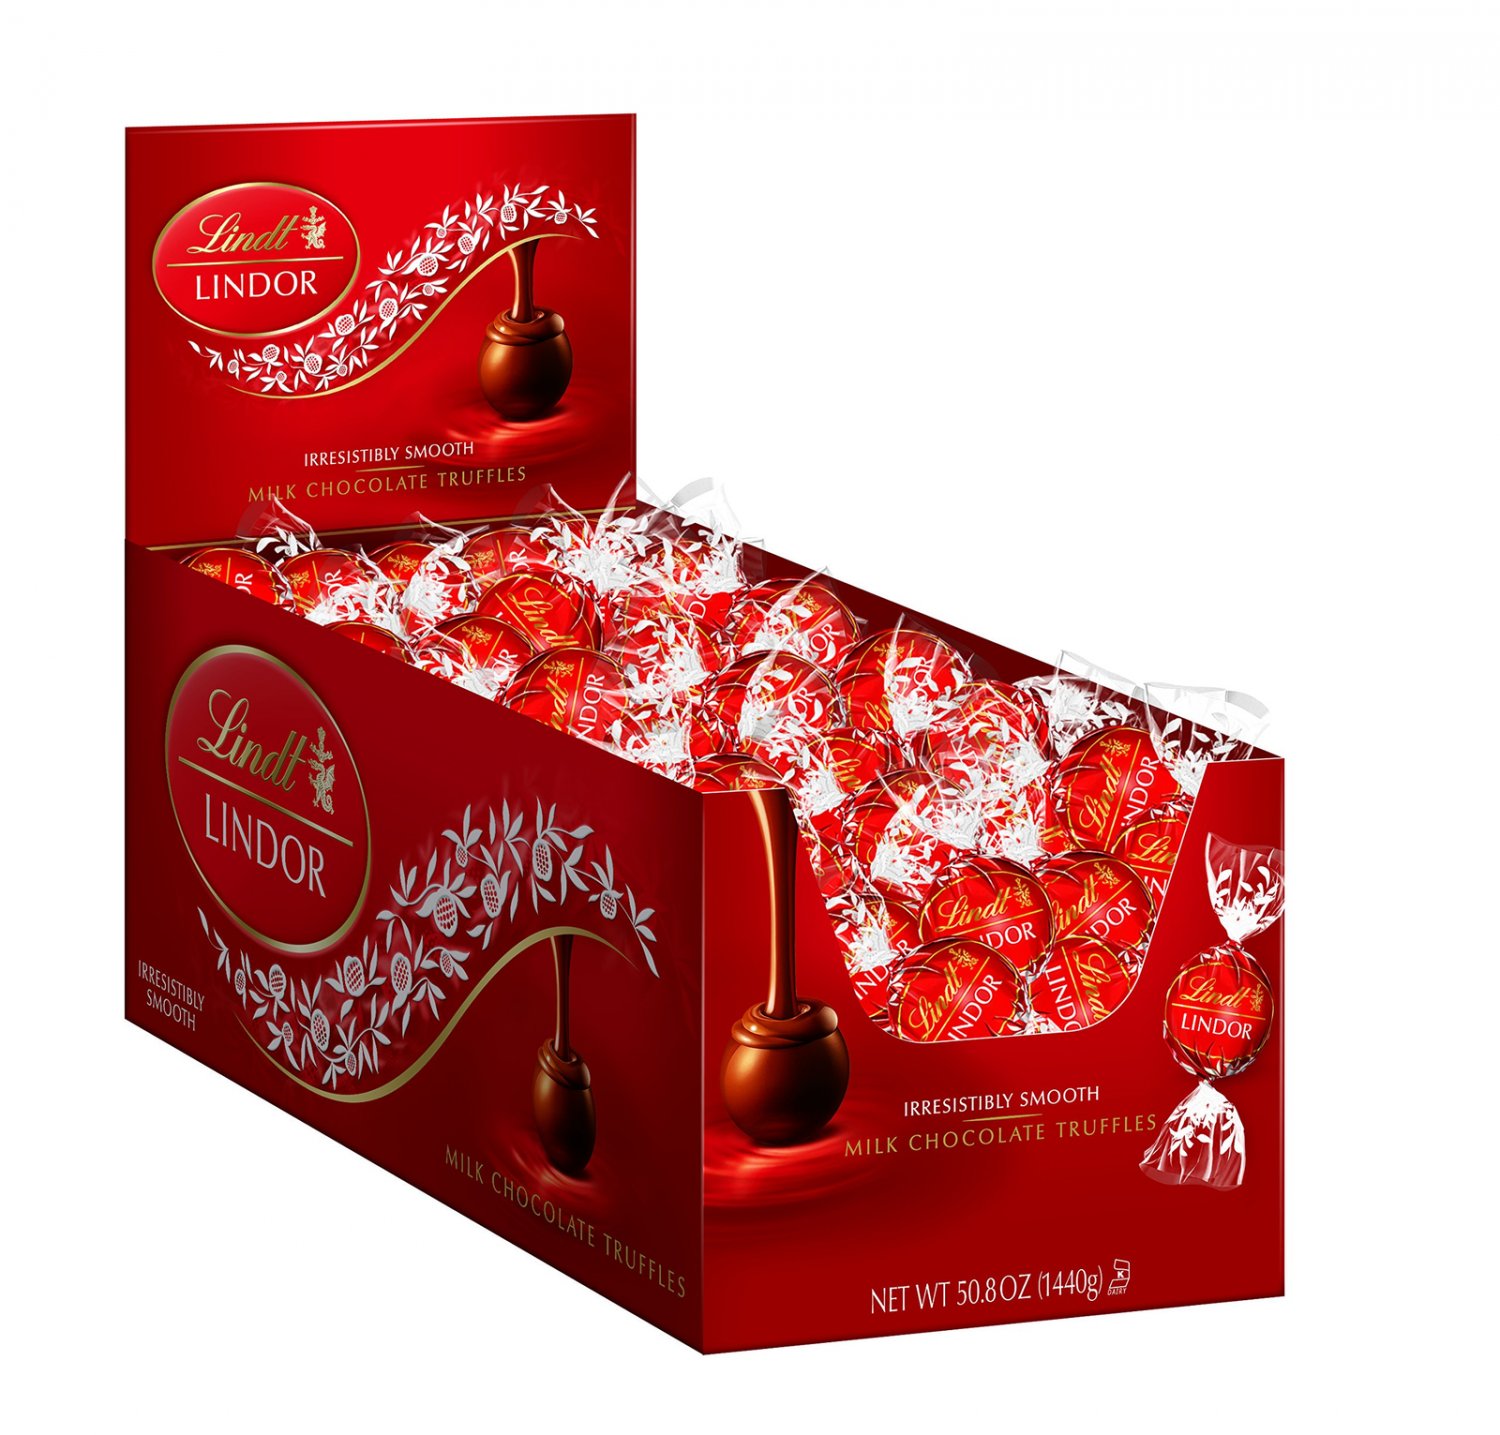 Lindt LINDOR Milk Chocolate Truffles, Kosher, with Smooth, Melting Truffle Center, 120 count